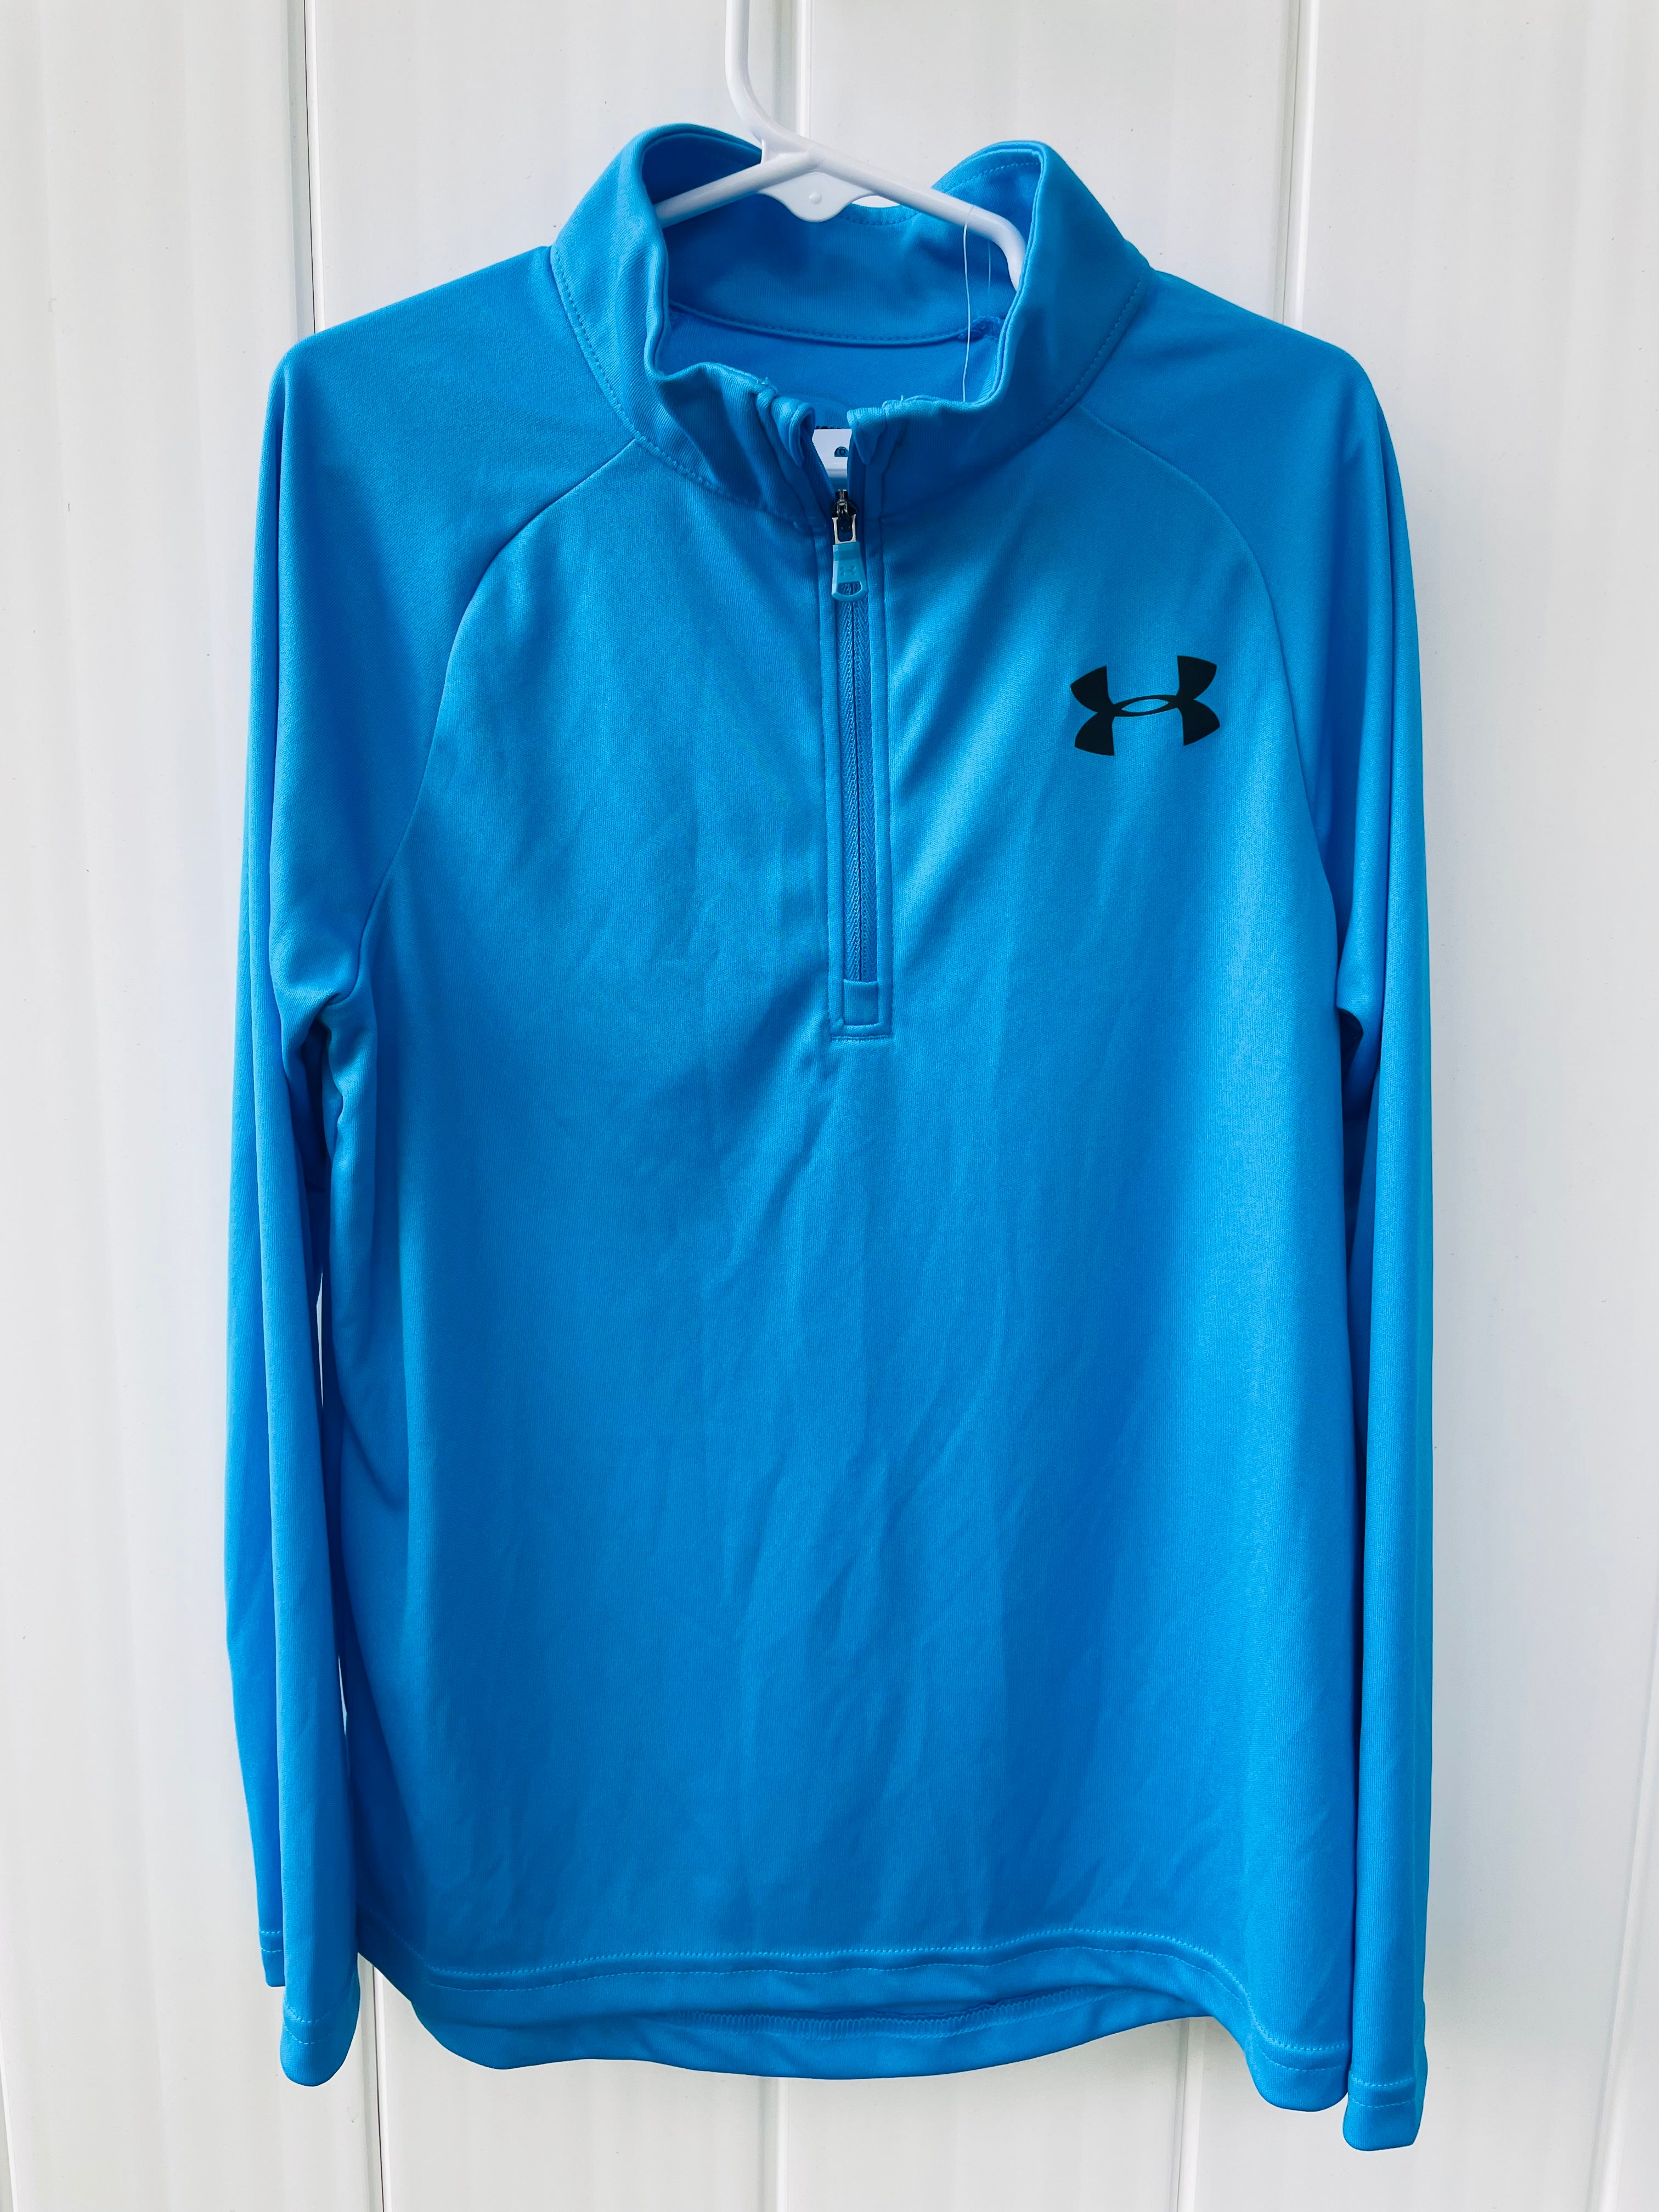 Under Armour NWT 1/4 Zip Pullover, Blue Boys Size S